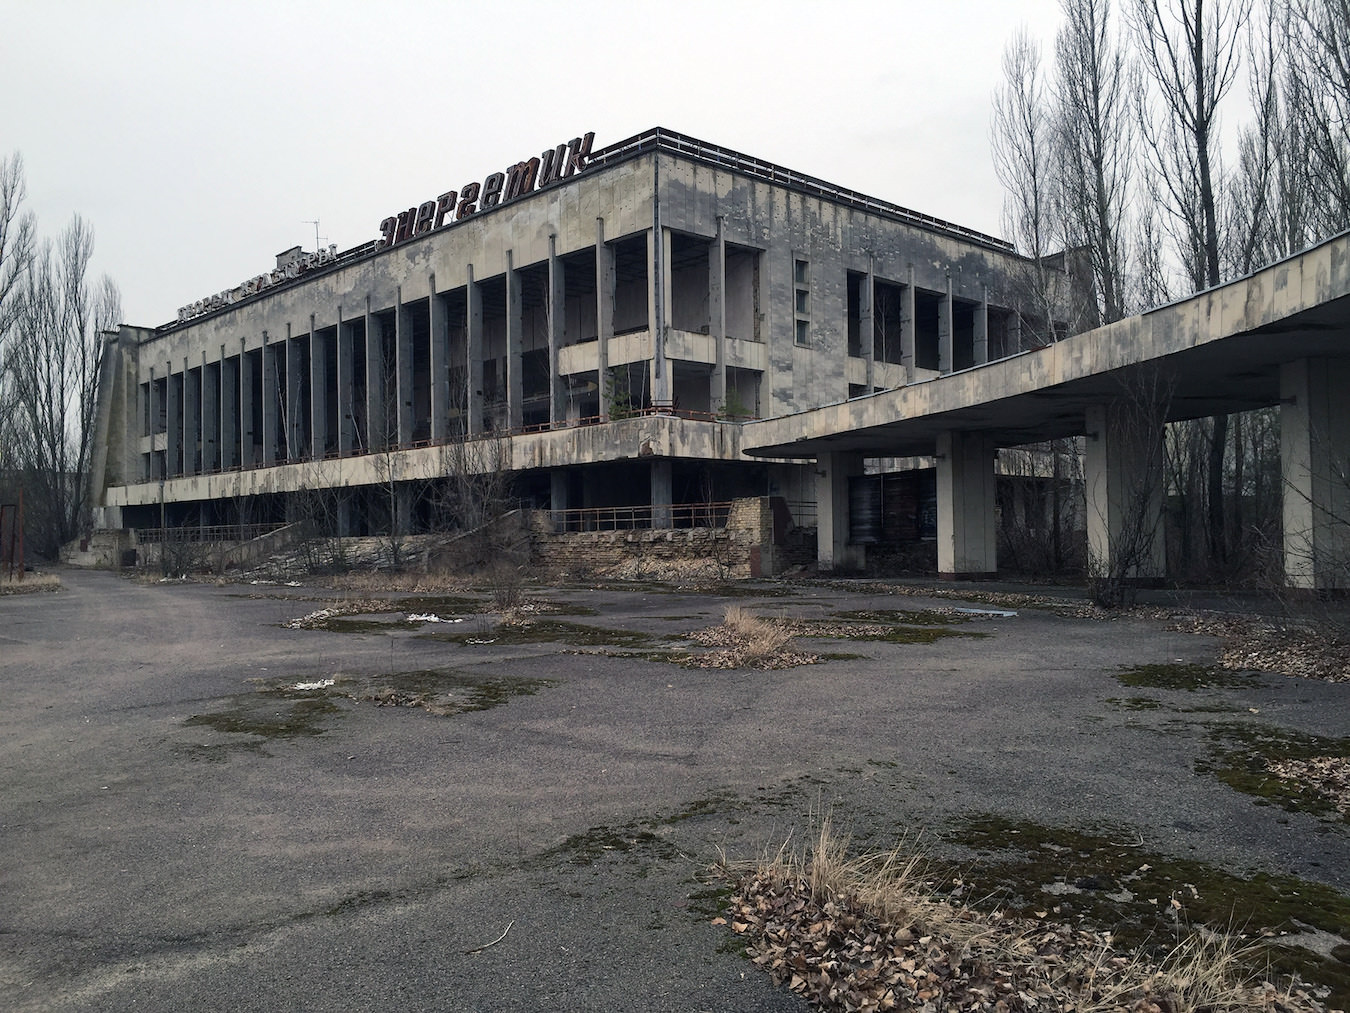 Prypjat was once a city of almost 50.000 people. Now it's a ghost town since 1986.